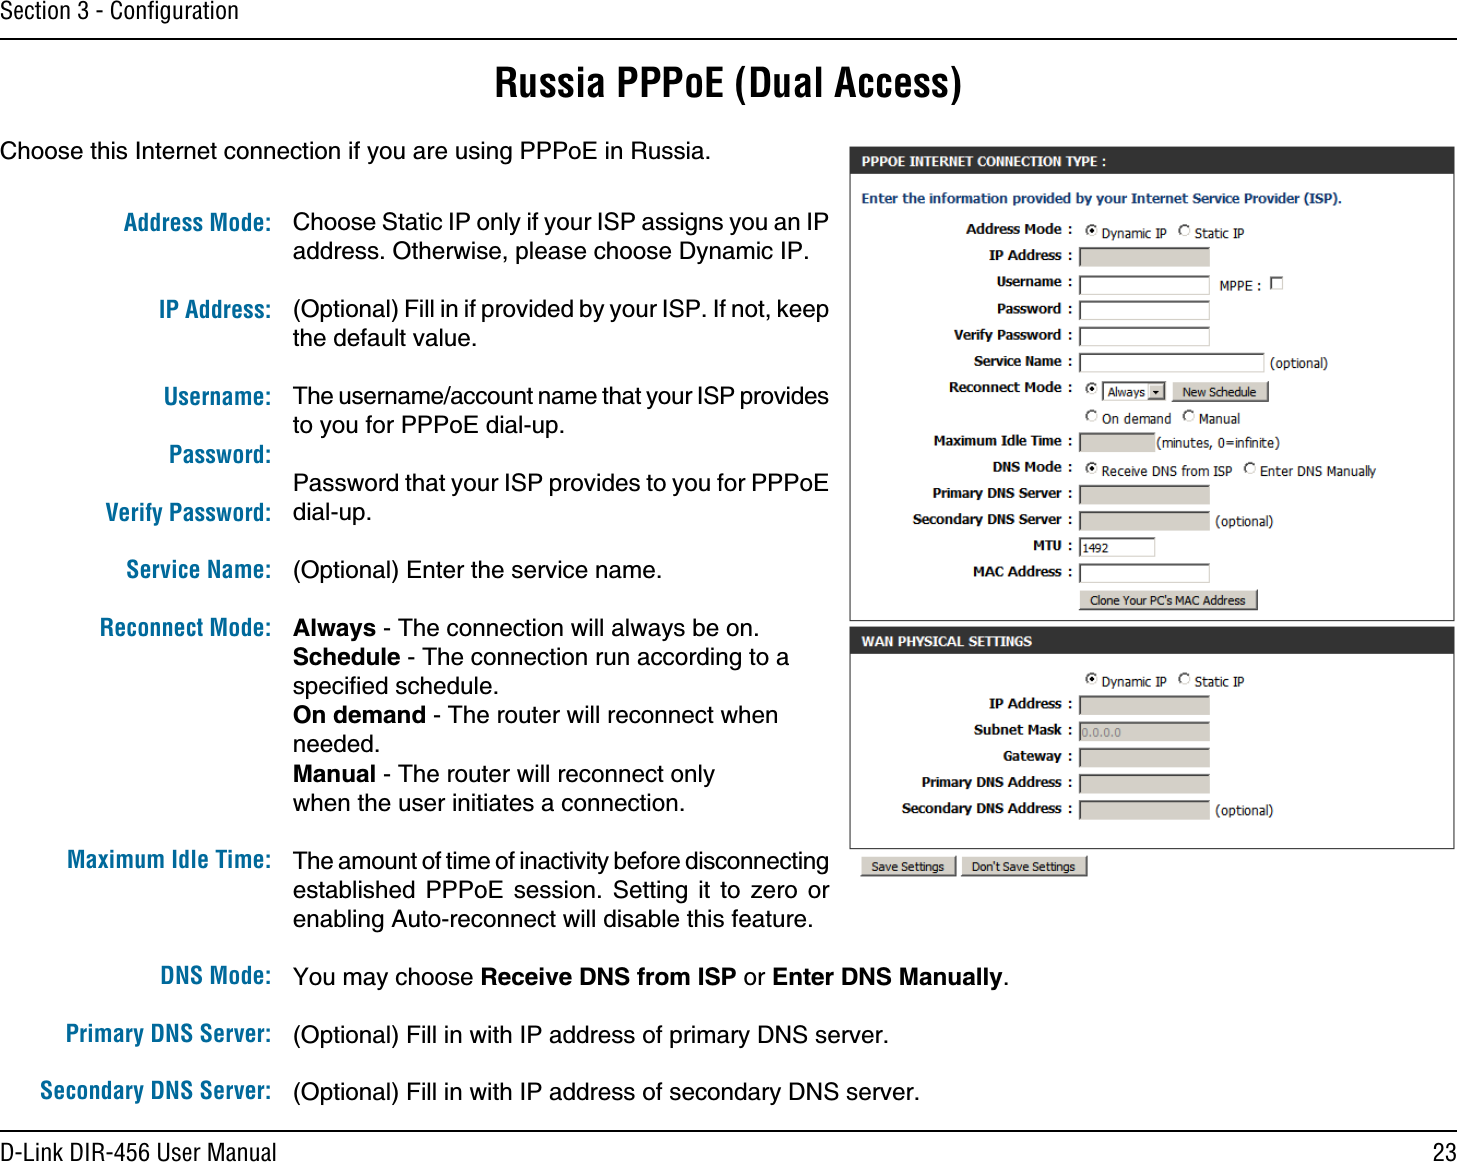 23D-Link DIR-456 User ManualSection 3 - ConﬁgurationRussia PPPoE (Dual Access)Choose this Internet connection if you are using PPPoE in Russia.Choose Static IP only if your ISP assigns you an IP address. Otherwise, please choose Dynamic IP.(Optional) Fill in if provided by your ISP. If not, keep the default value.The username/account name that your ISP provides to you for PPPoE dial-up.Password that your ISP provides to you for PPPoE dial-up.(Optional) Enter the service name.Always - The connection will always be on. Schedule - The connection run according to a speciﬁed schedule. On demand - The router will reconnect when needed. Manual - The router will reconnect only when the user initiates a connection.The amount of time of inactivity before disconnecting established PPPoE session. Setting it to zero or enabling Auto-reconnect will disable this feature.You may choose Receive DNS from ISP or Enter DNS Manually.(Optional) Fill in with IP address of primary DNS server.(Optional) Fill in with IP address of secondary DNS server.Address Mode: IP Address: Username:Password:Verify Password:Service Name:Reconnect Mode:  Maximum Idle Time:DNS Mode:Primary DNS Server:Secondary DNS Server: